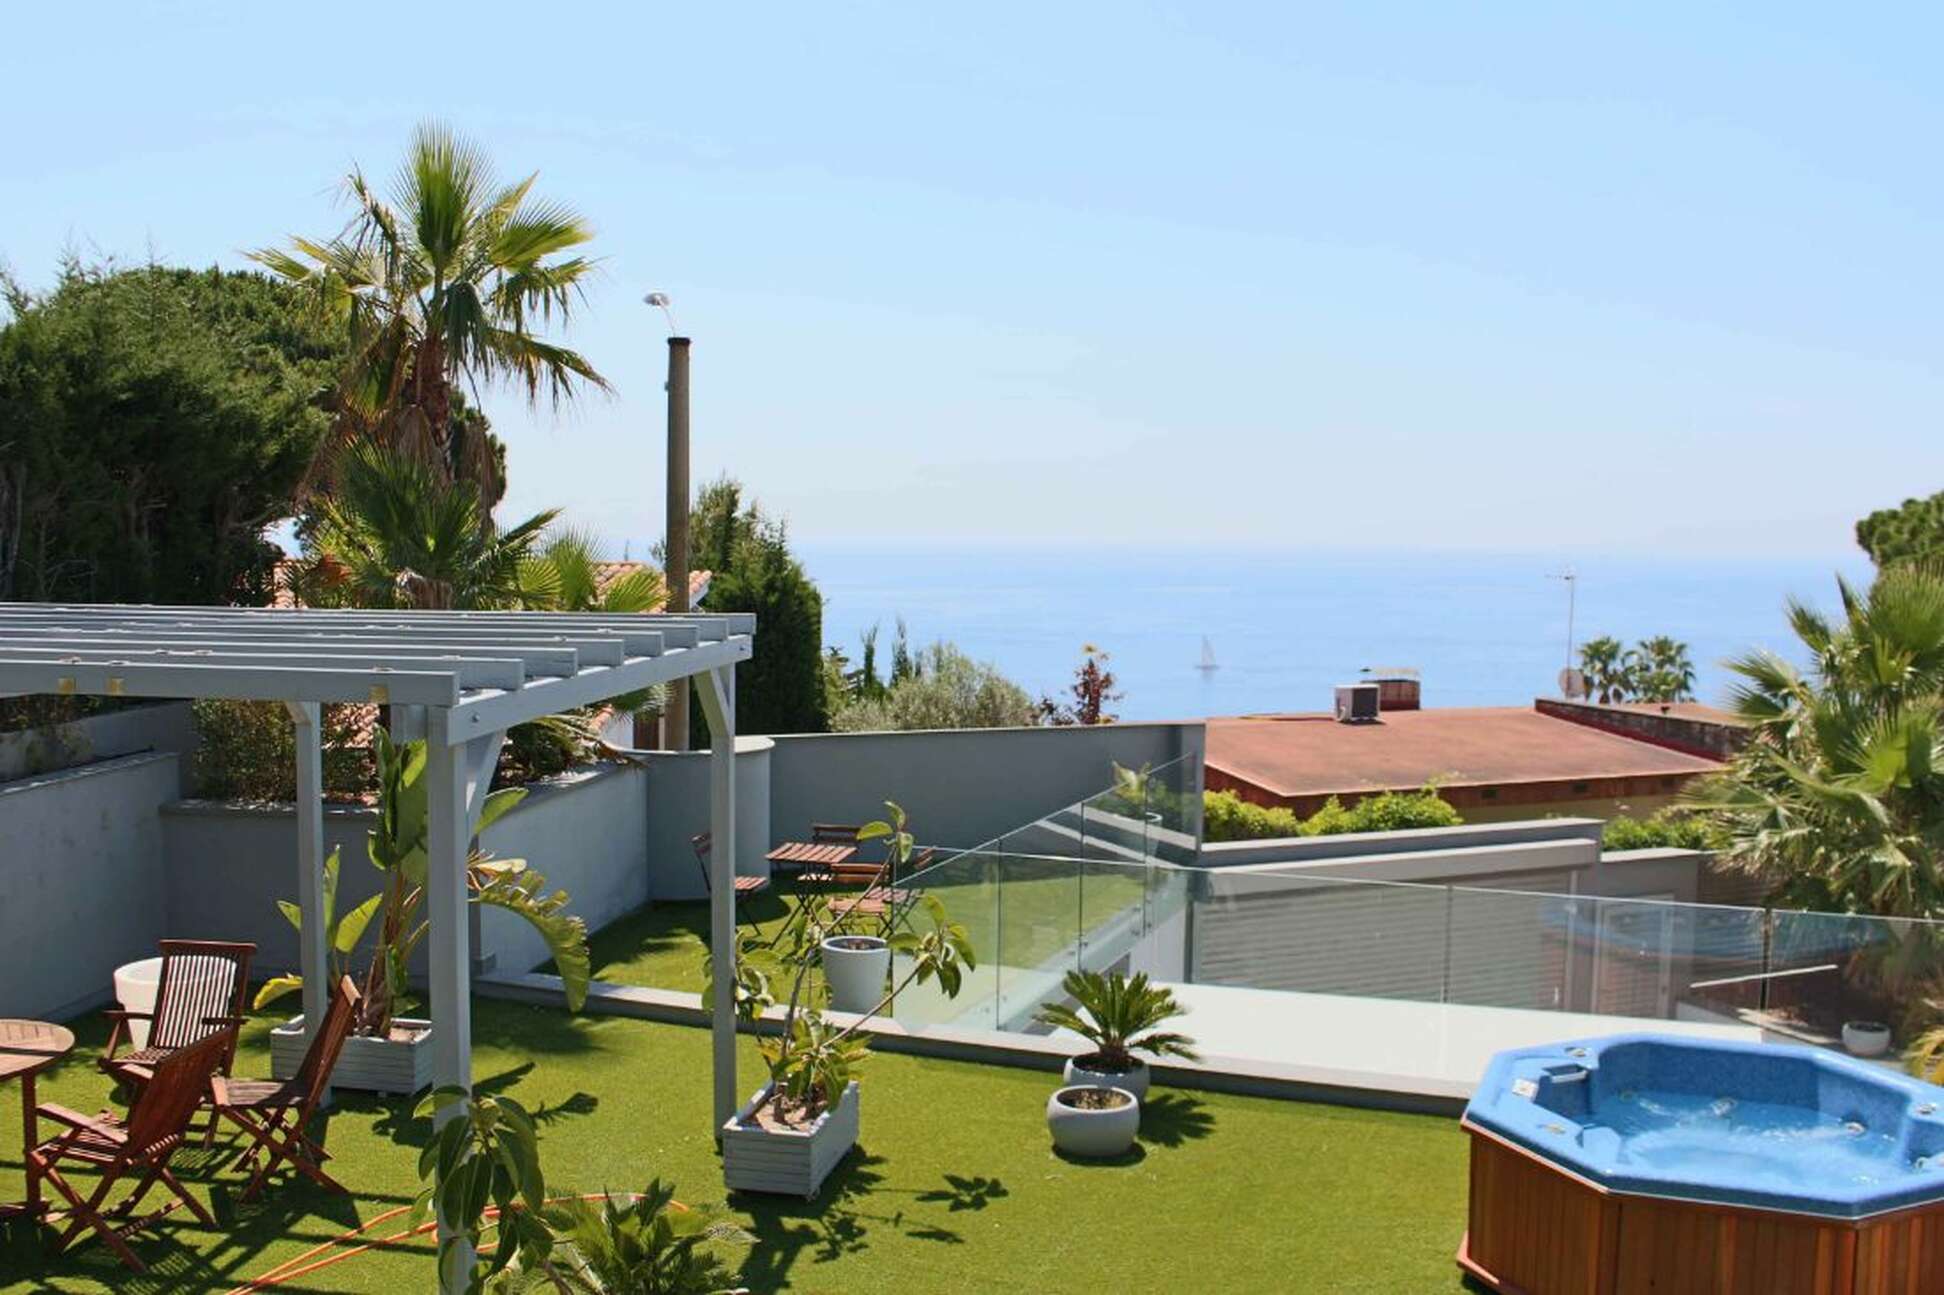 Exclusive house with stunning sea views in Tossa de Mar, available now.